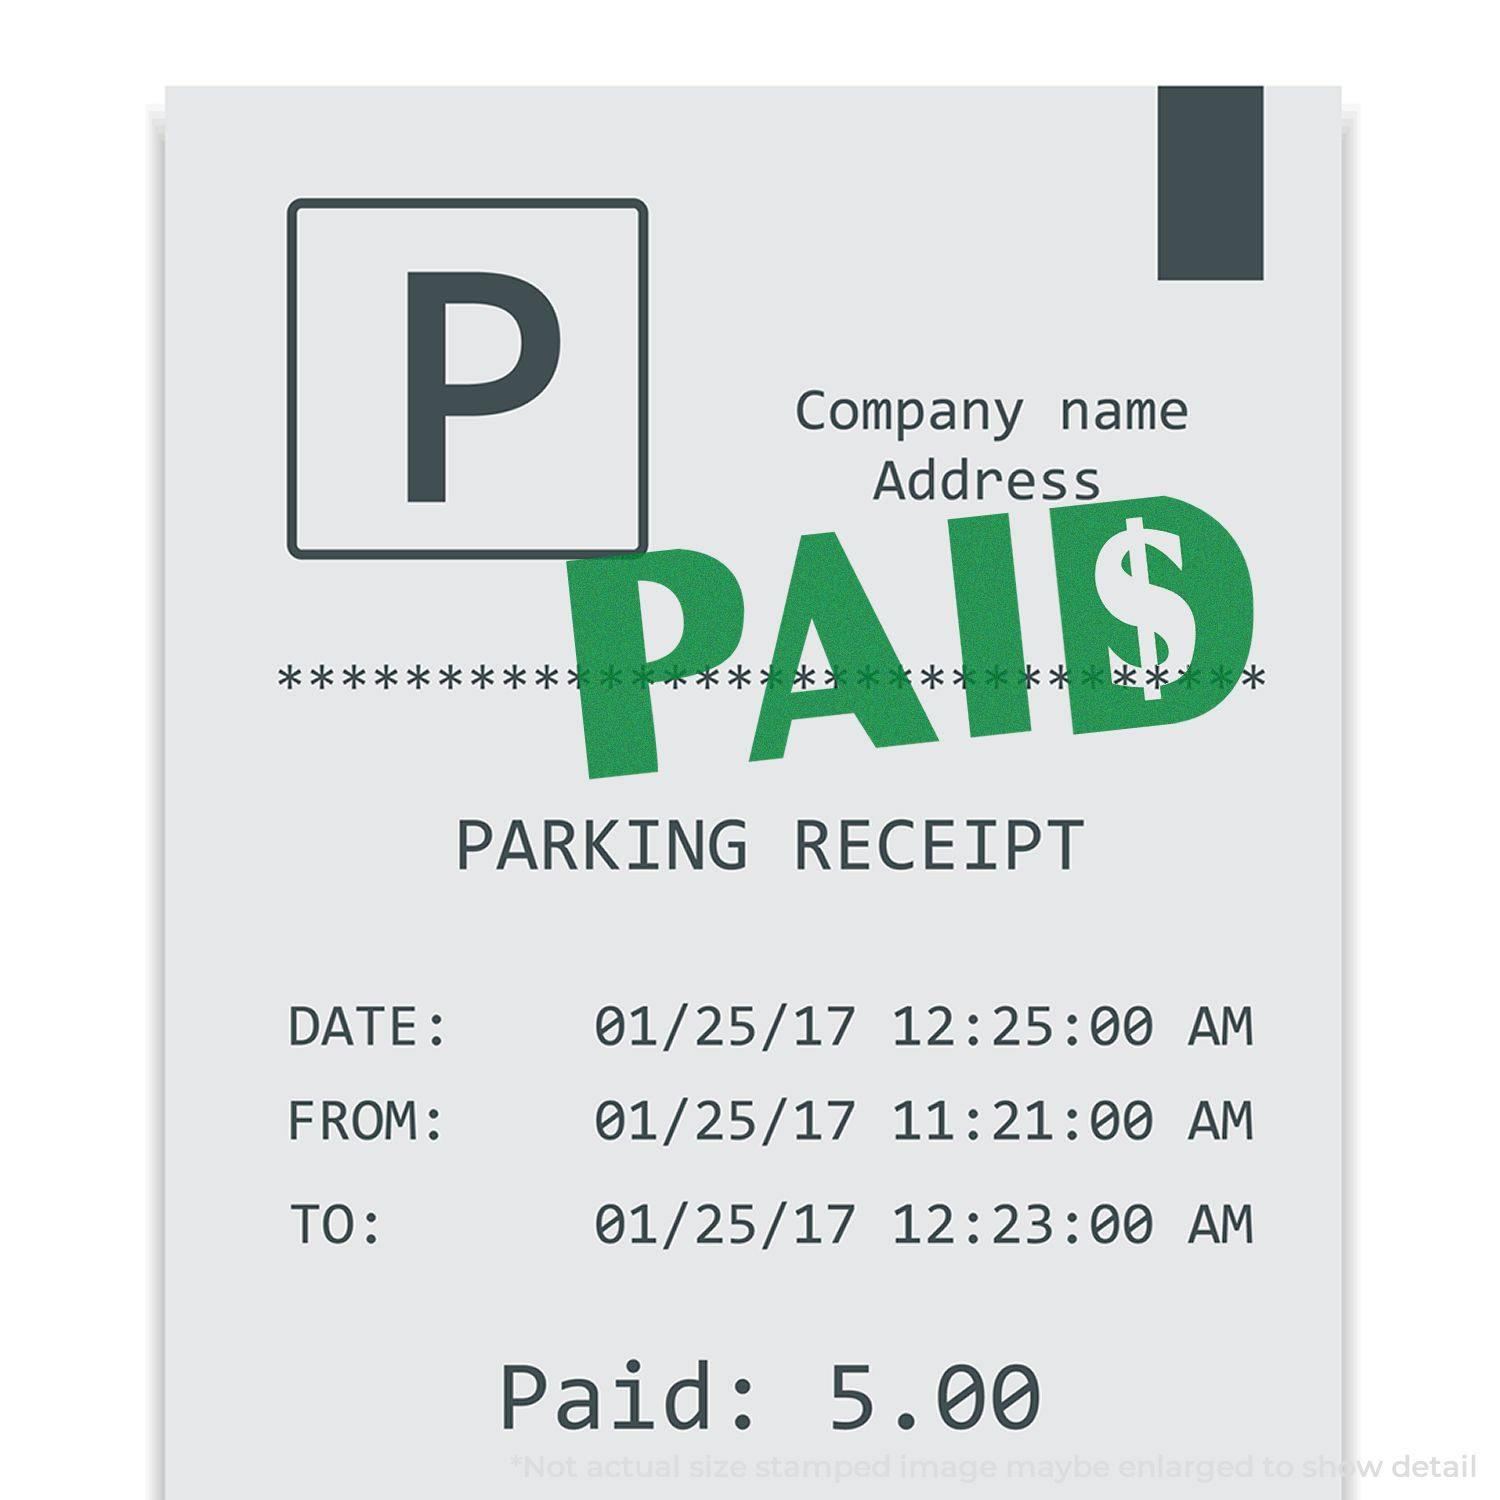 A stock office rubber stamp with a stamped image showing how the text "PAID" in a large bold font with a dollar sign ($) inside the alphabet "D" is displayed after stamping.